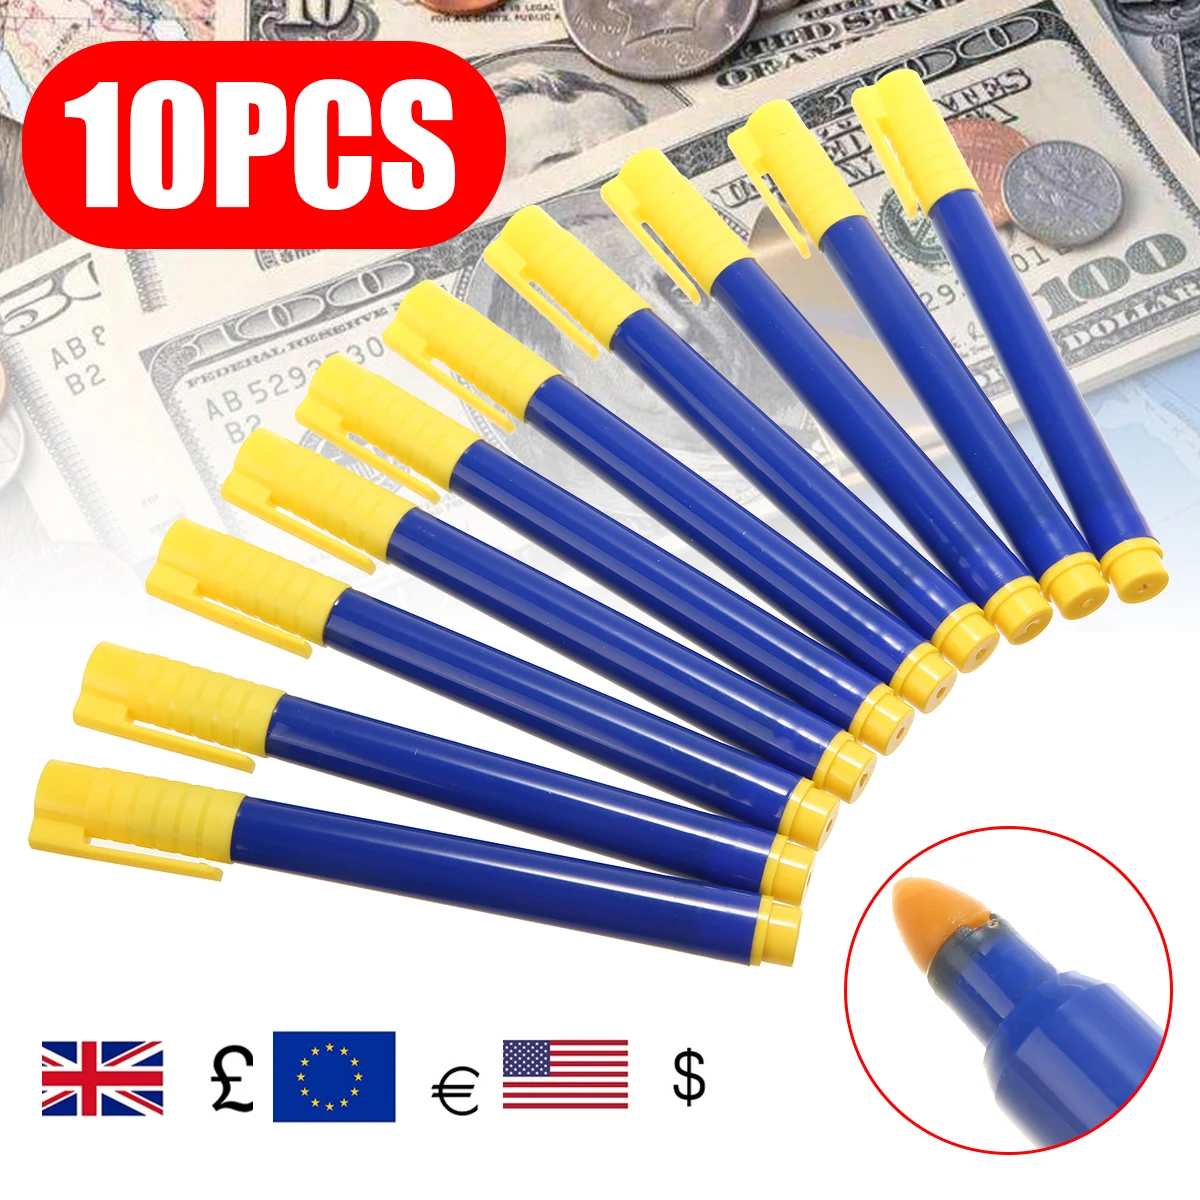 Фото 10pcs/set Practical 130mm Bank Note Checker Tester Pens Counterfeit Fake Currency Money Pounds Euros Dollars Detector Marker Pen |